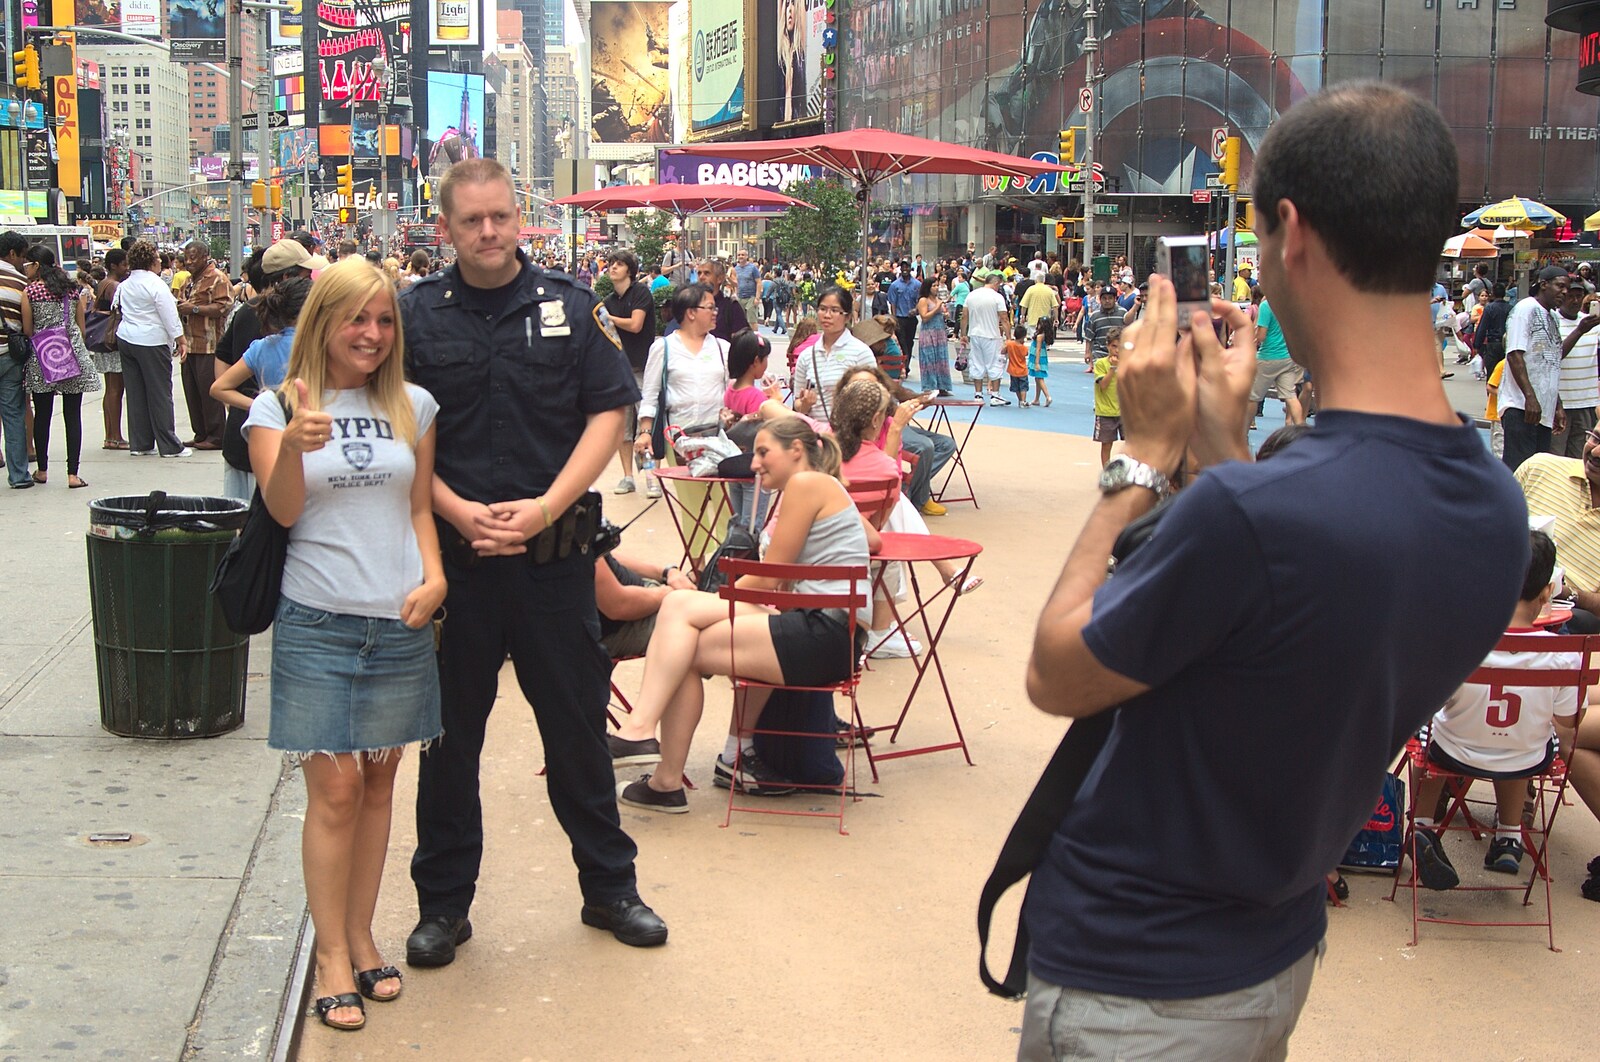 The NYPD are doing PR sessions from A Manhattan Hotdog, New York, USA - 21st August 2011